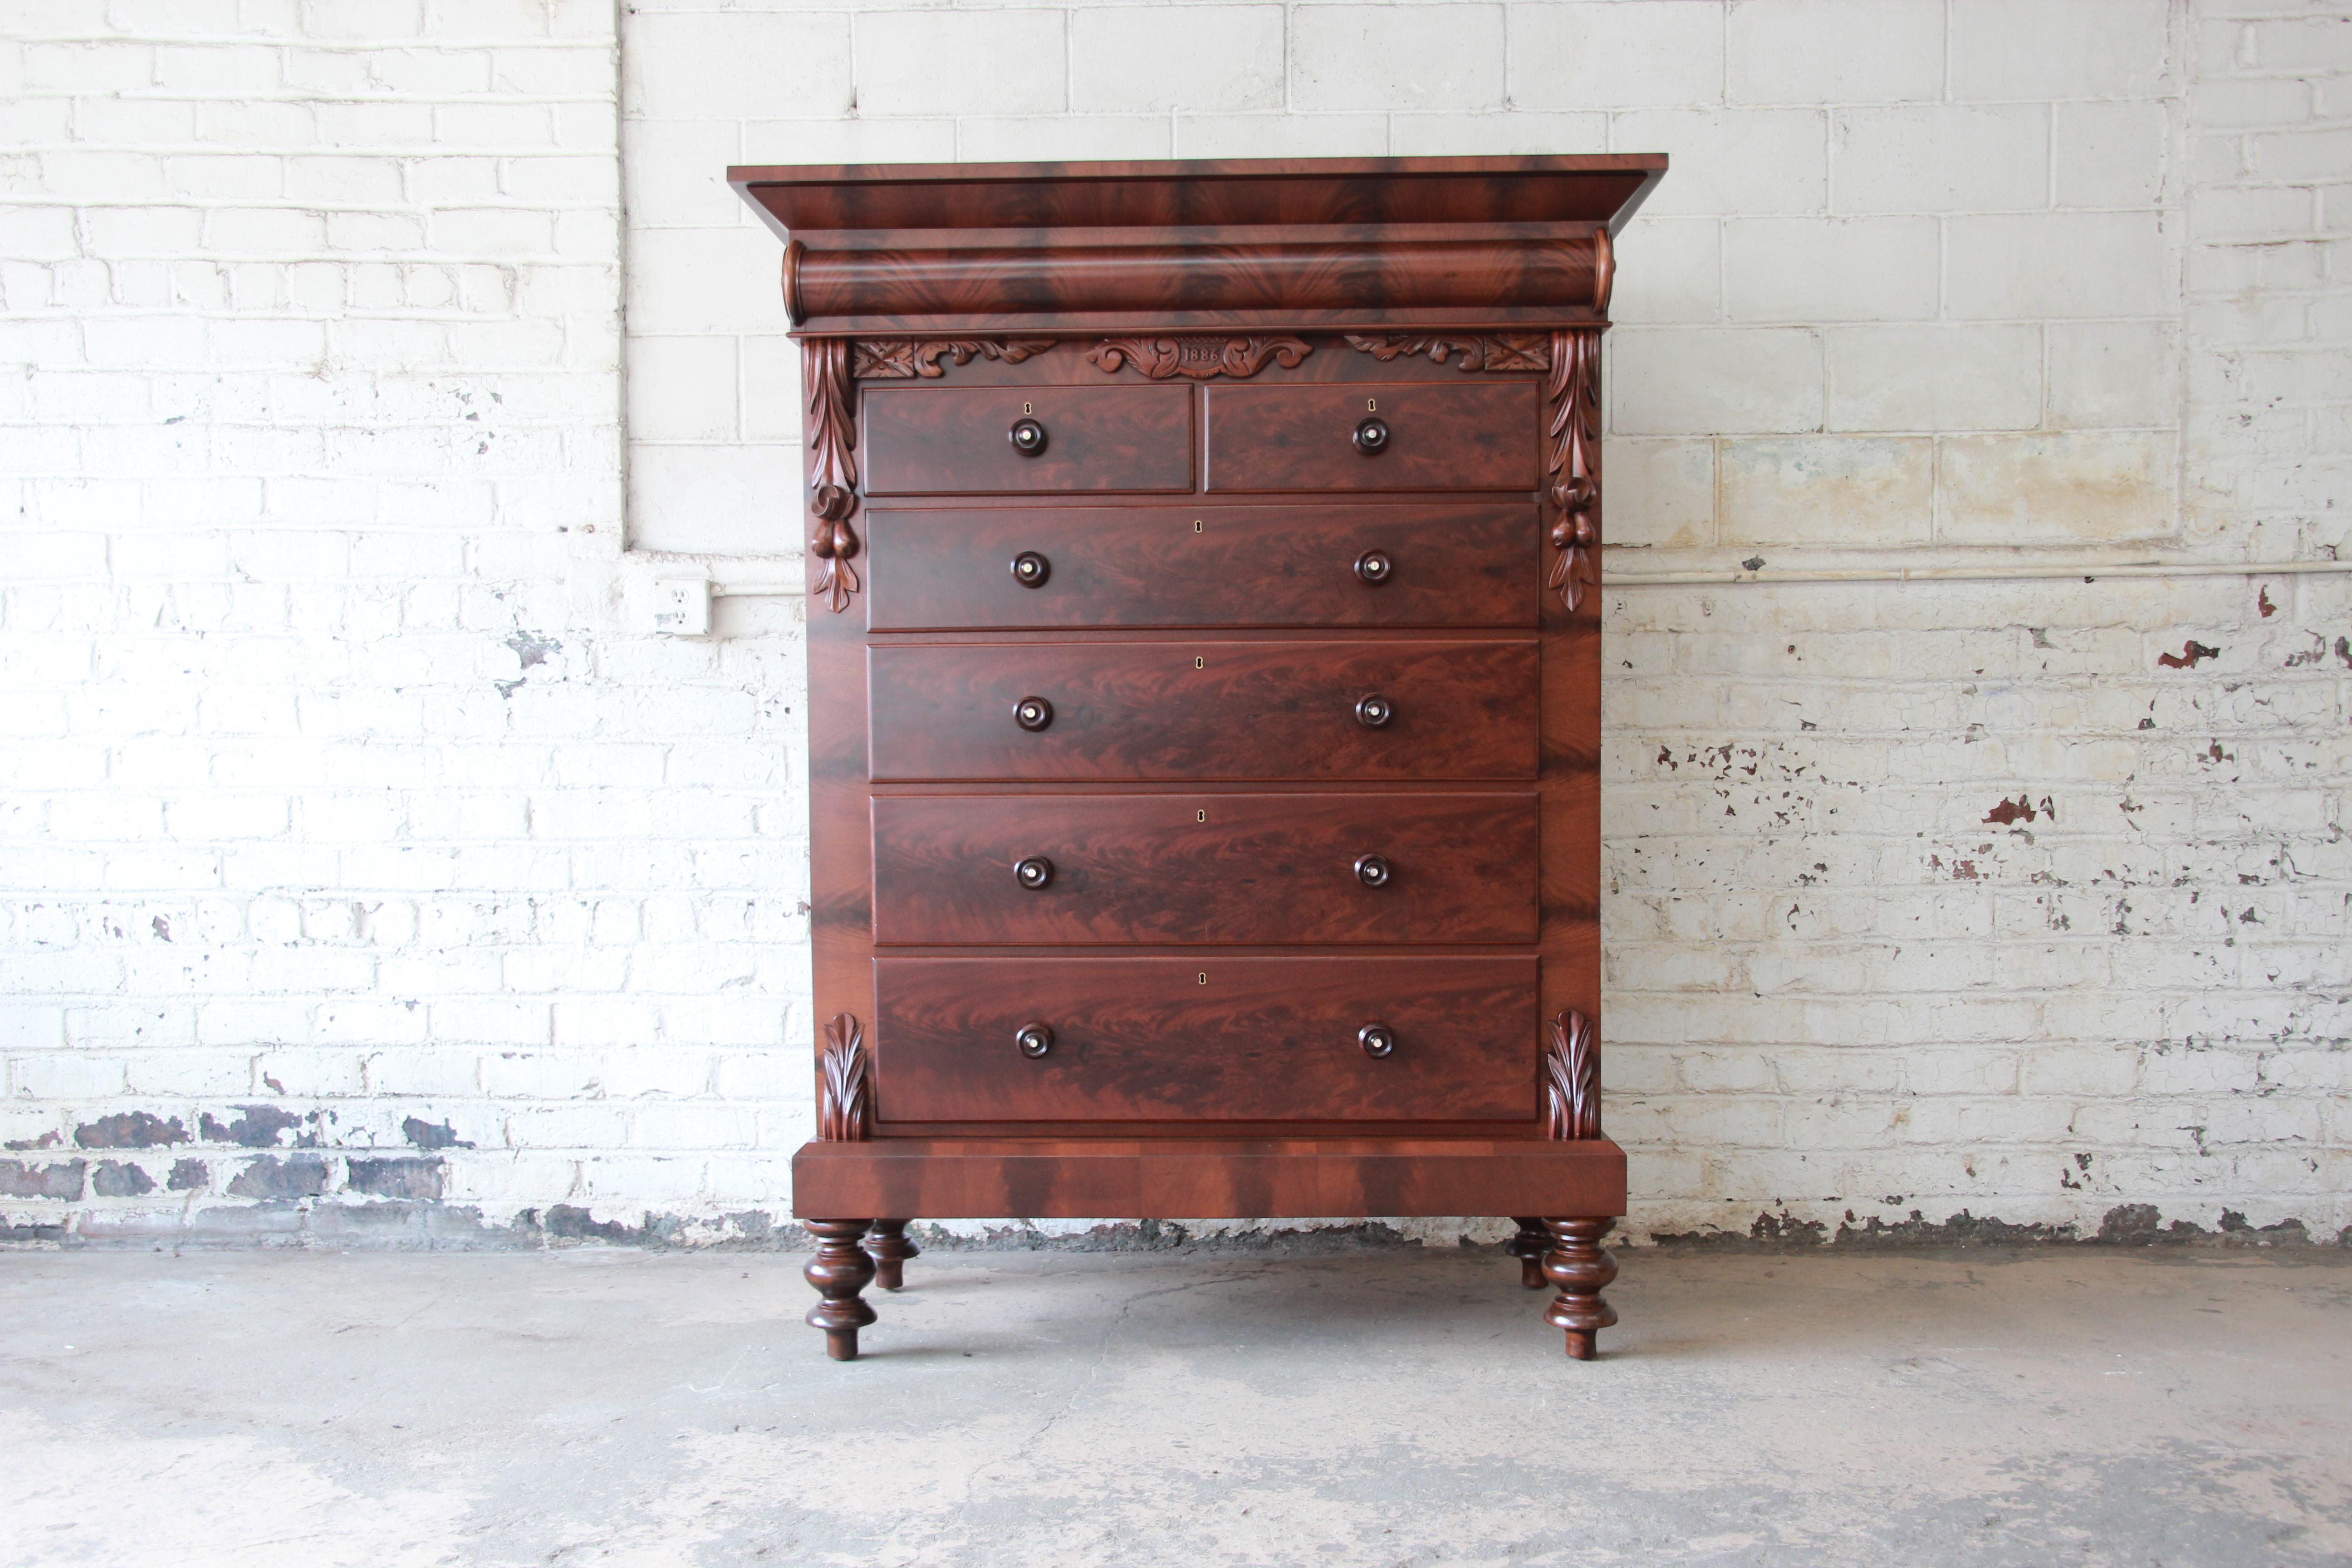 An immaculate and monumental American Empire flame mahogany chest of drawers. The chest features stunning wood grain and unique carved details with a floral motif. It offers ample room for storage with six deep dovetailed drawers, as well as a large